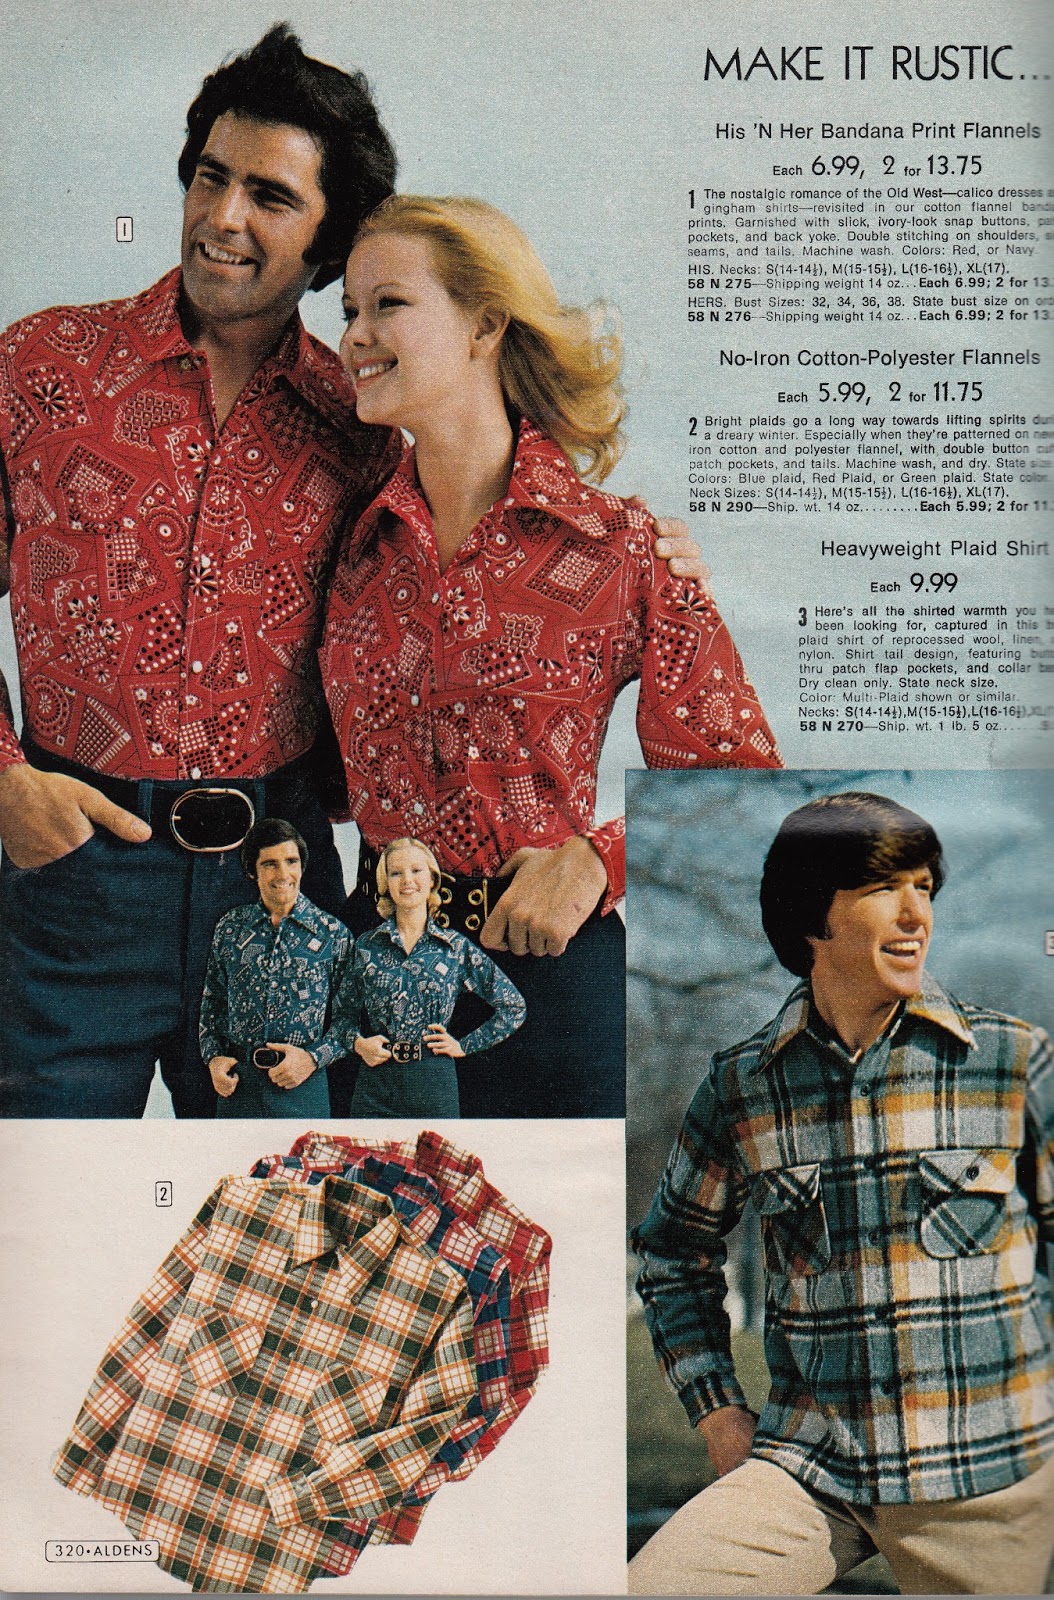 Kathy Loghry Blogspot: That's So 70s: Fashion as Couples Therapy - Part 3!